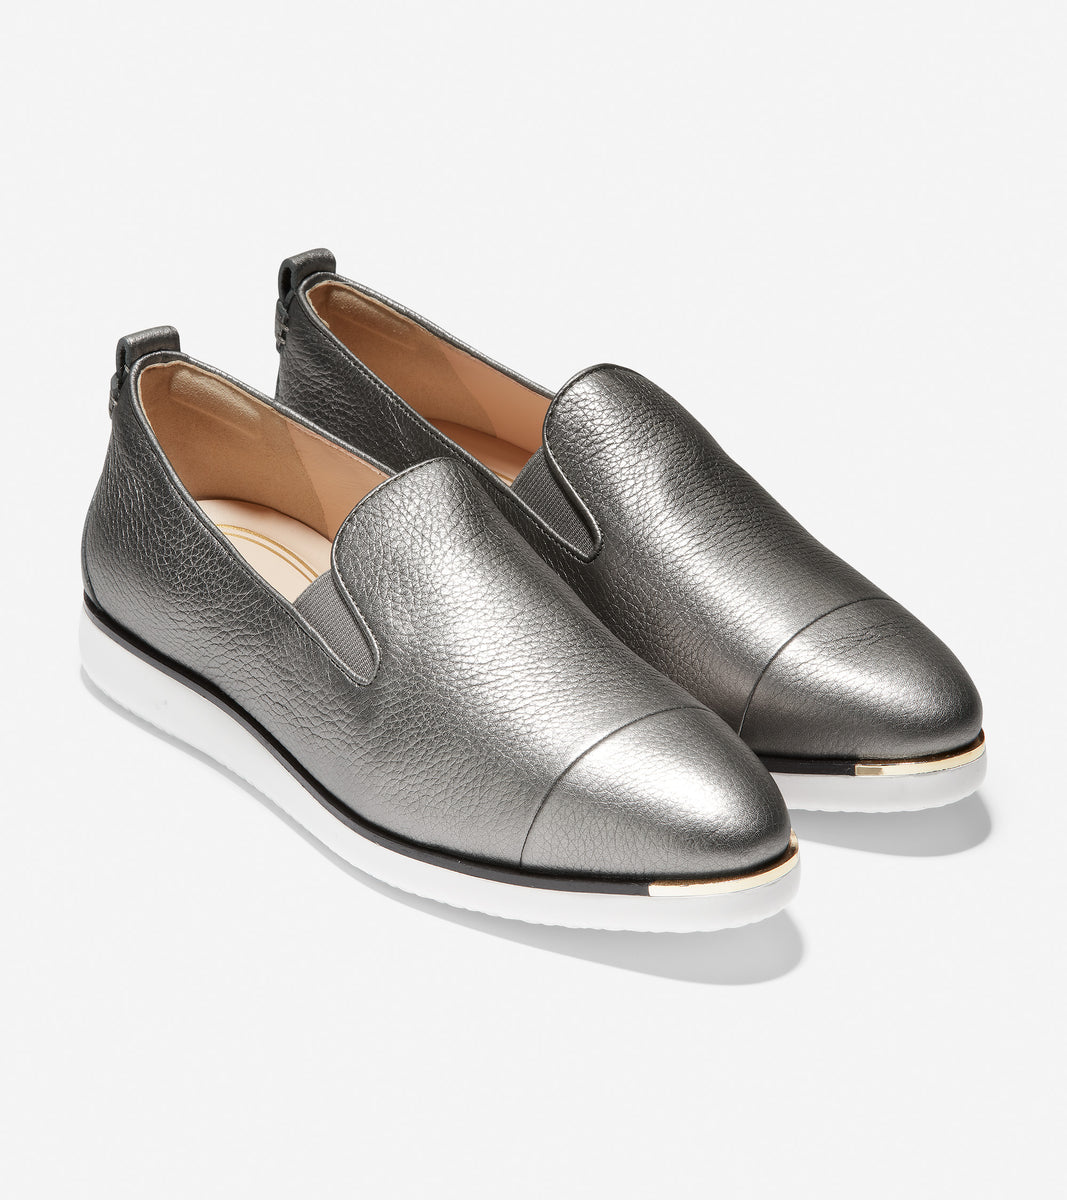 ColeHaan-Grand Ambition Slip-On Sneaker-w15520-Metallic Tumbled Leather